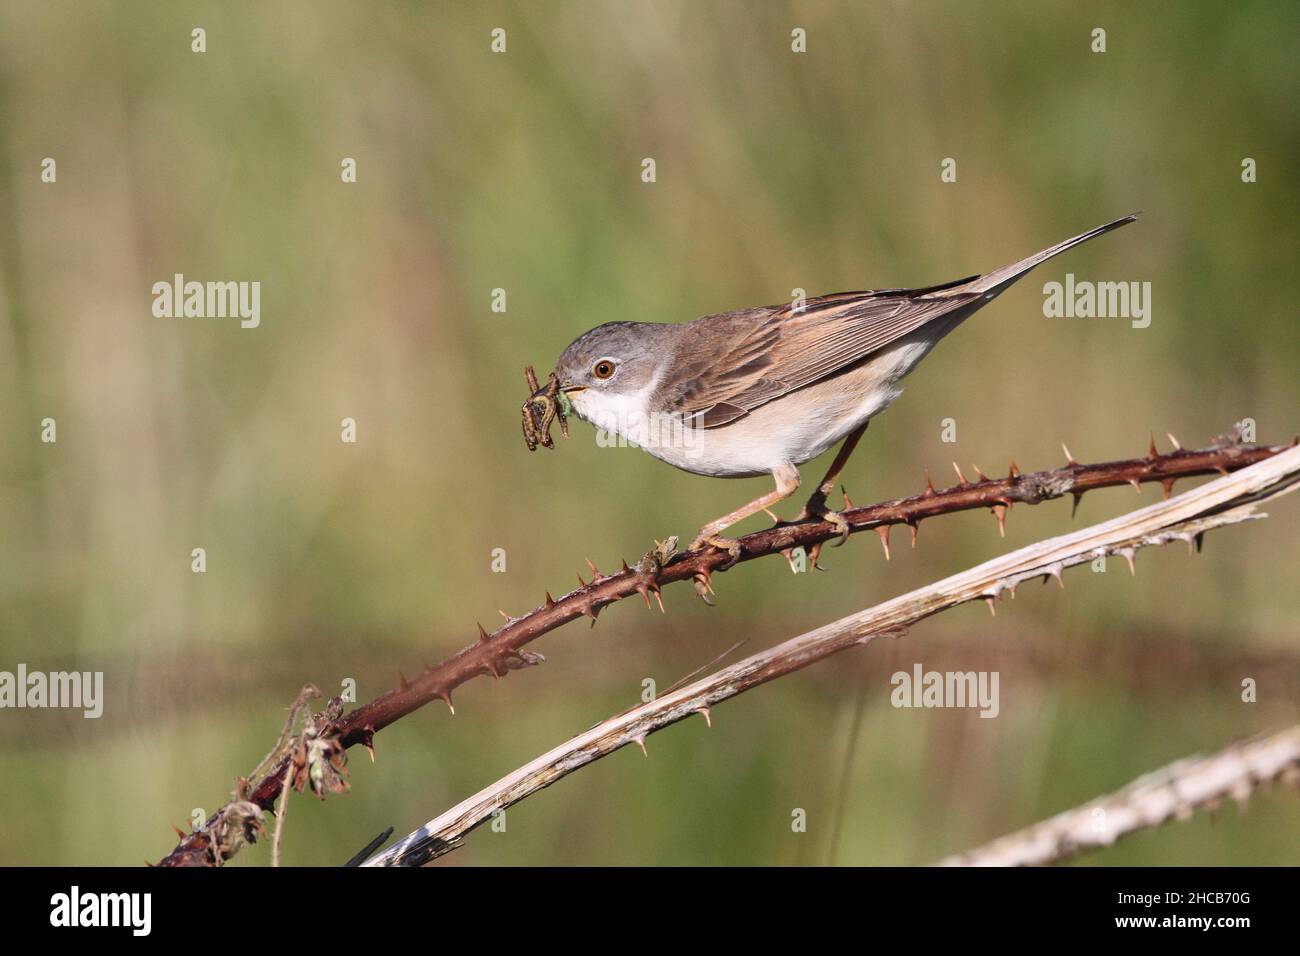 Whitethroat with a beak full of larvae and bugs is an indication of a nearby nest with chicks in that are still being fed. Stock Photo